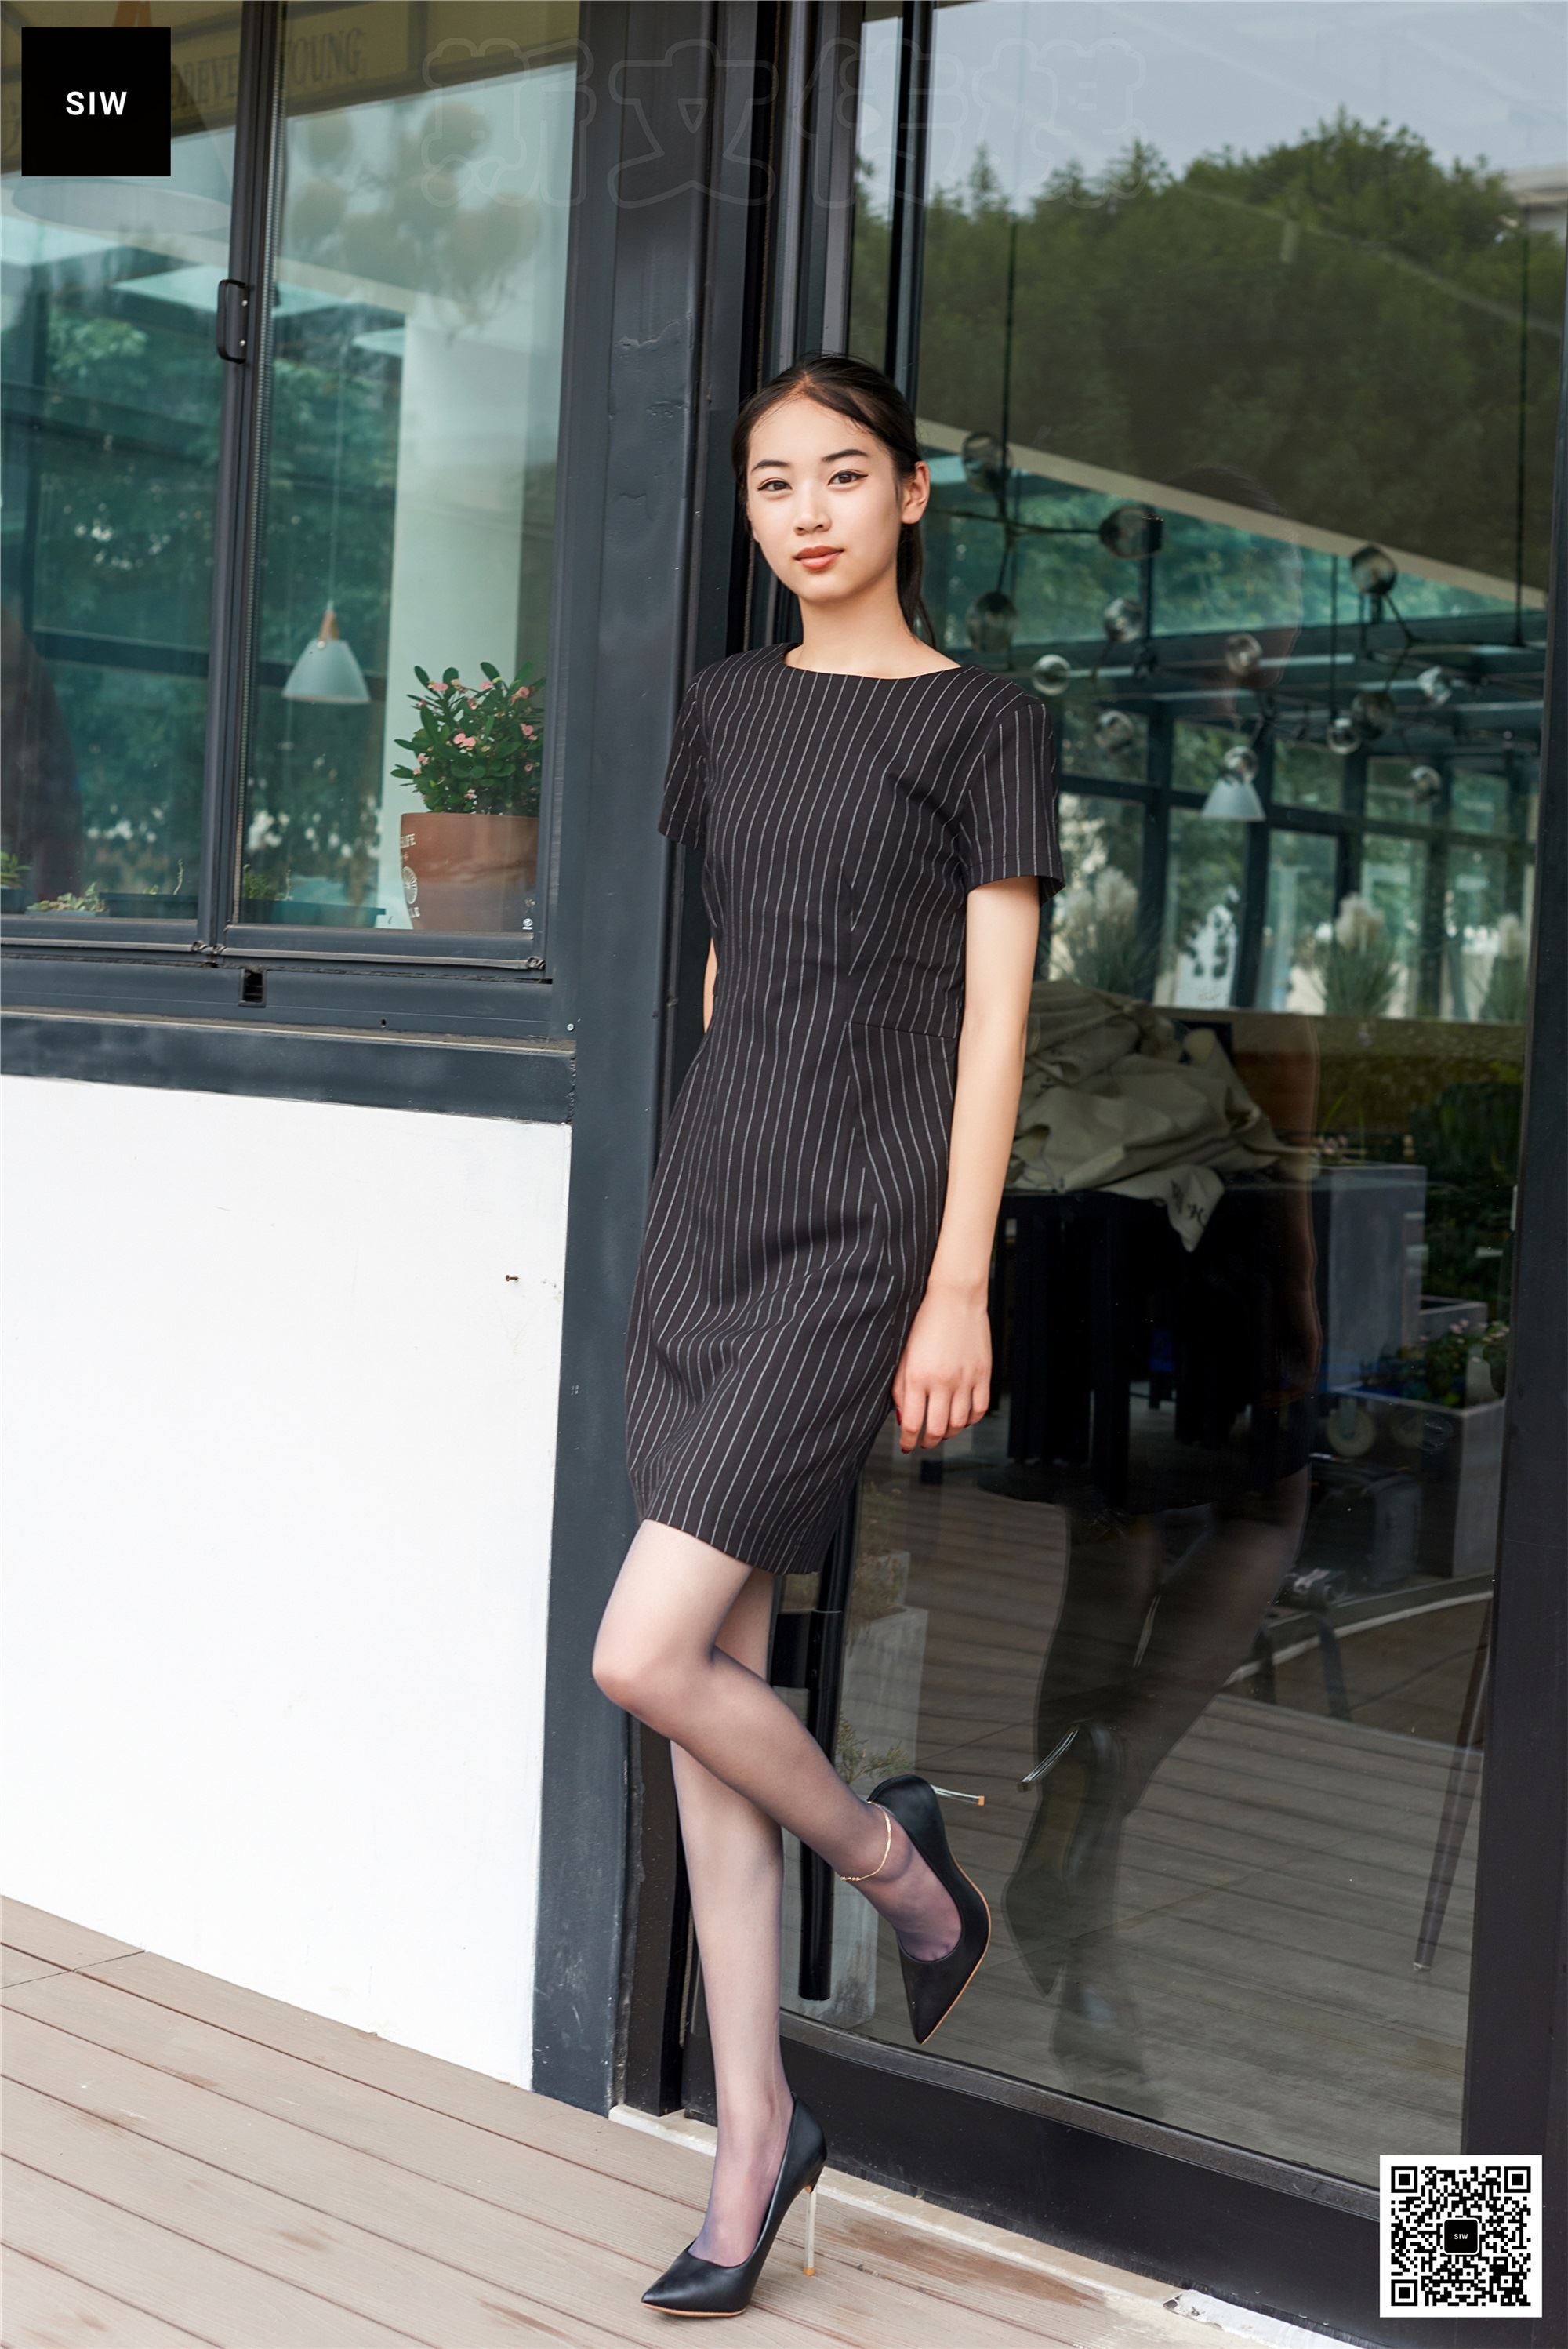 SIW Sven Media 048 Chinese striped small fresh short sleeve dress - Lily